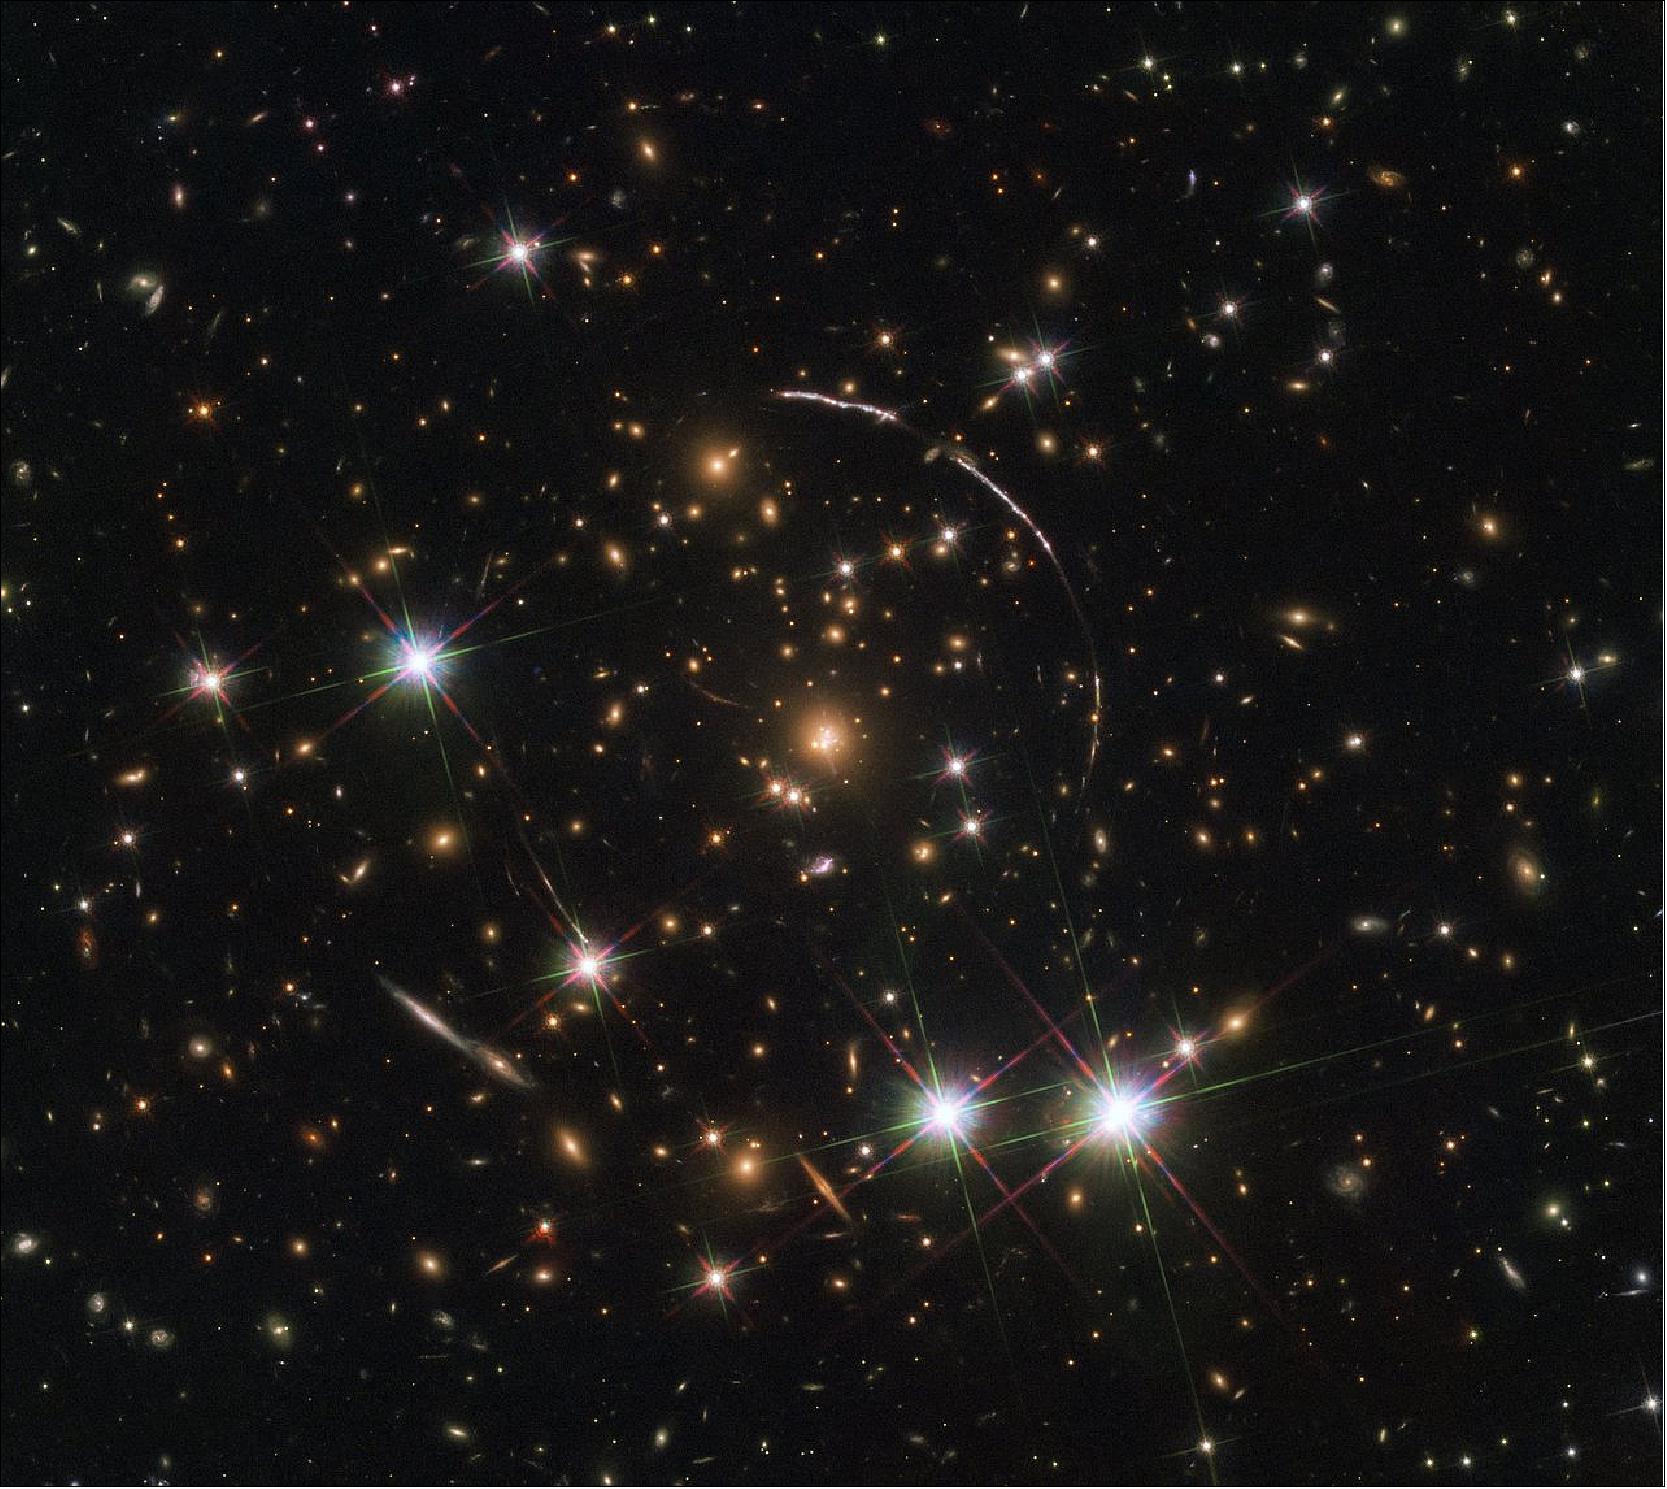 Figure 11: Astronomers using the NASA/ESA Hubble Space Telescope have observed a galaxy in the distant regions of the Universe which appears duplicated at least 12 times on the night sky. This unique sight, created by strong gravitational lensing, helps astronomers get a better understanding of the cosmic era known as the epoch of reionization (image credit: ESA, NASA, E. Rivera-Thorsen et al.)